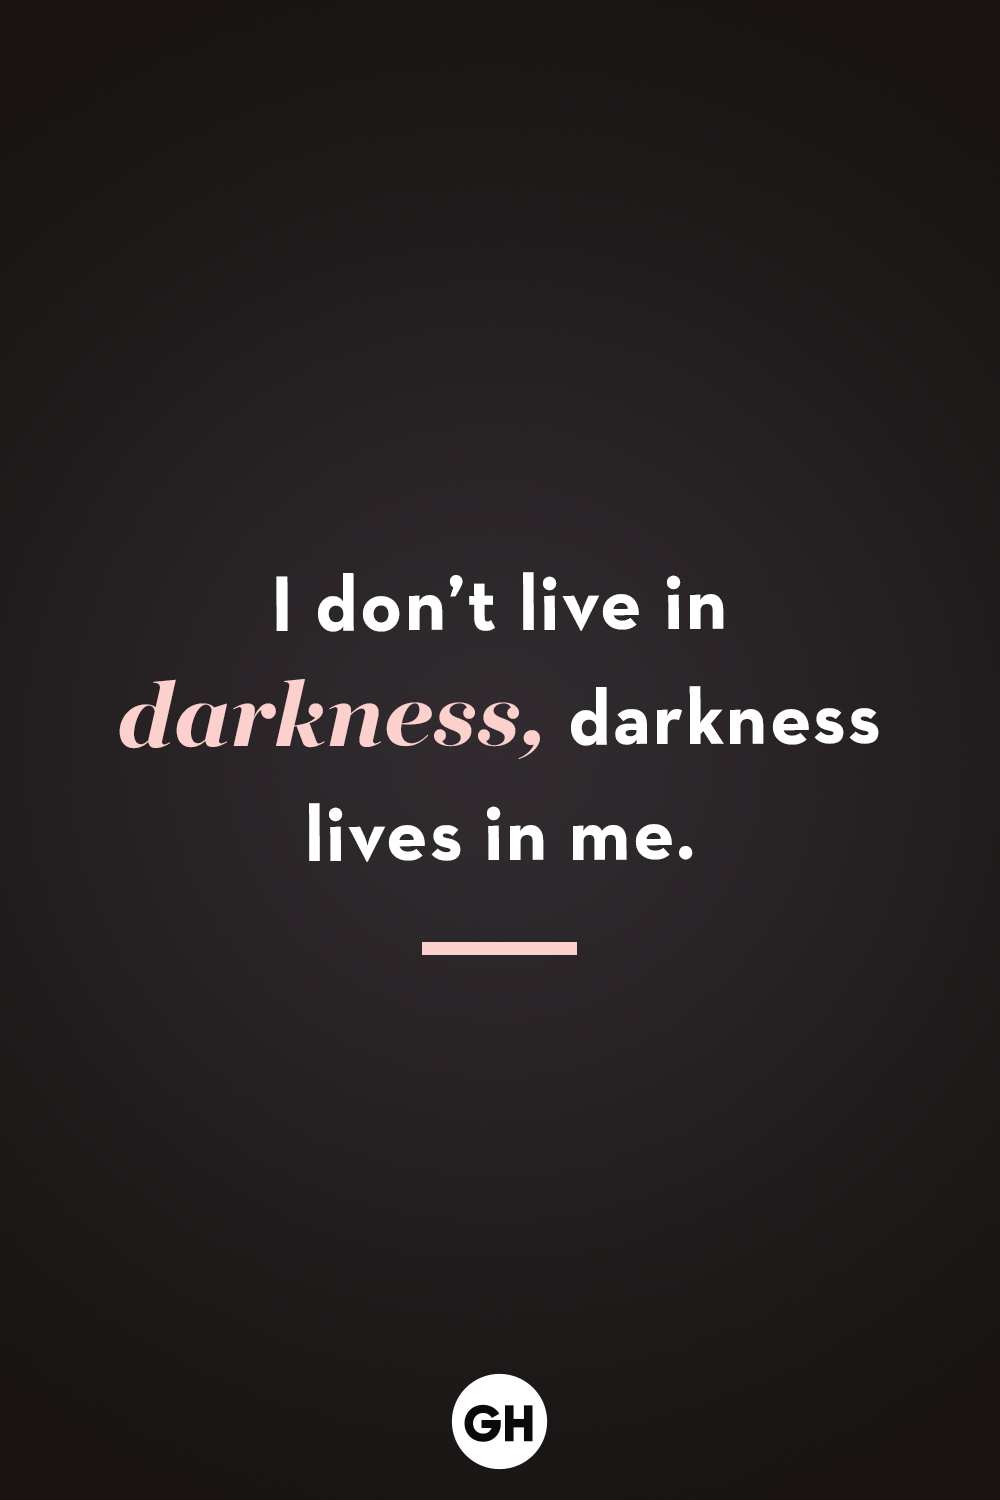  Quotes  With Wallpapers  Love Dark  Full Song